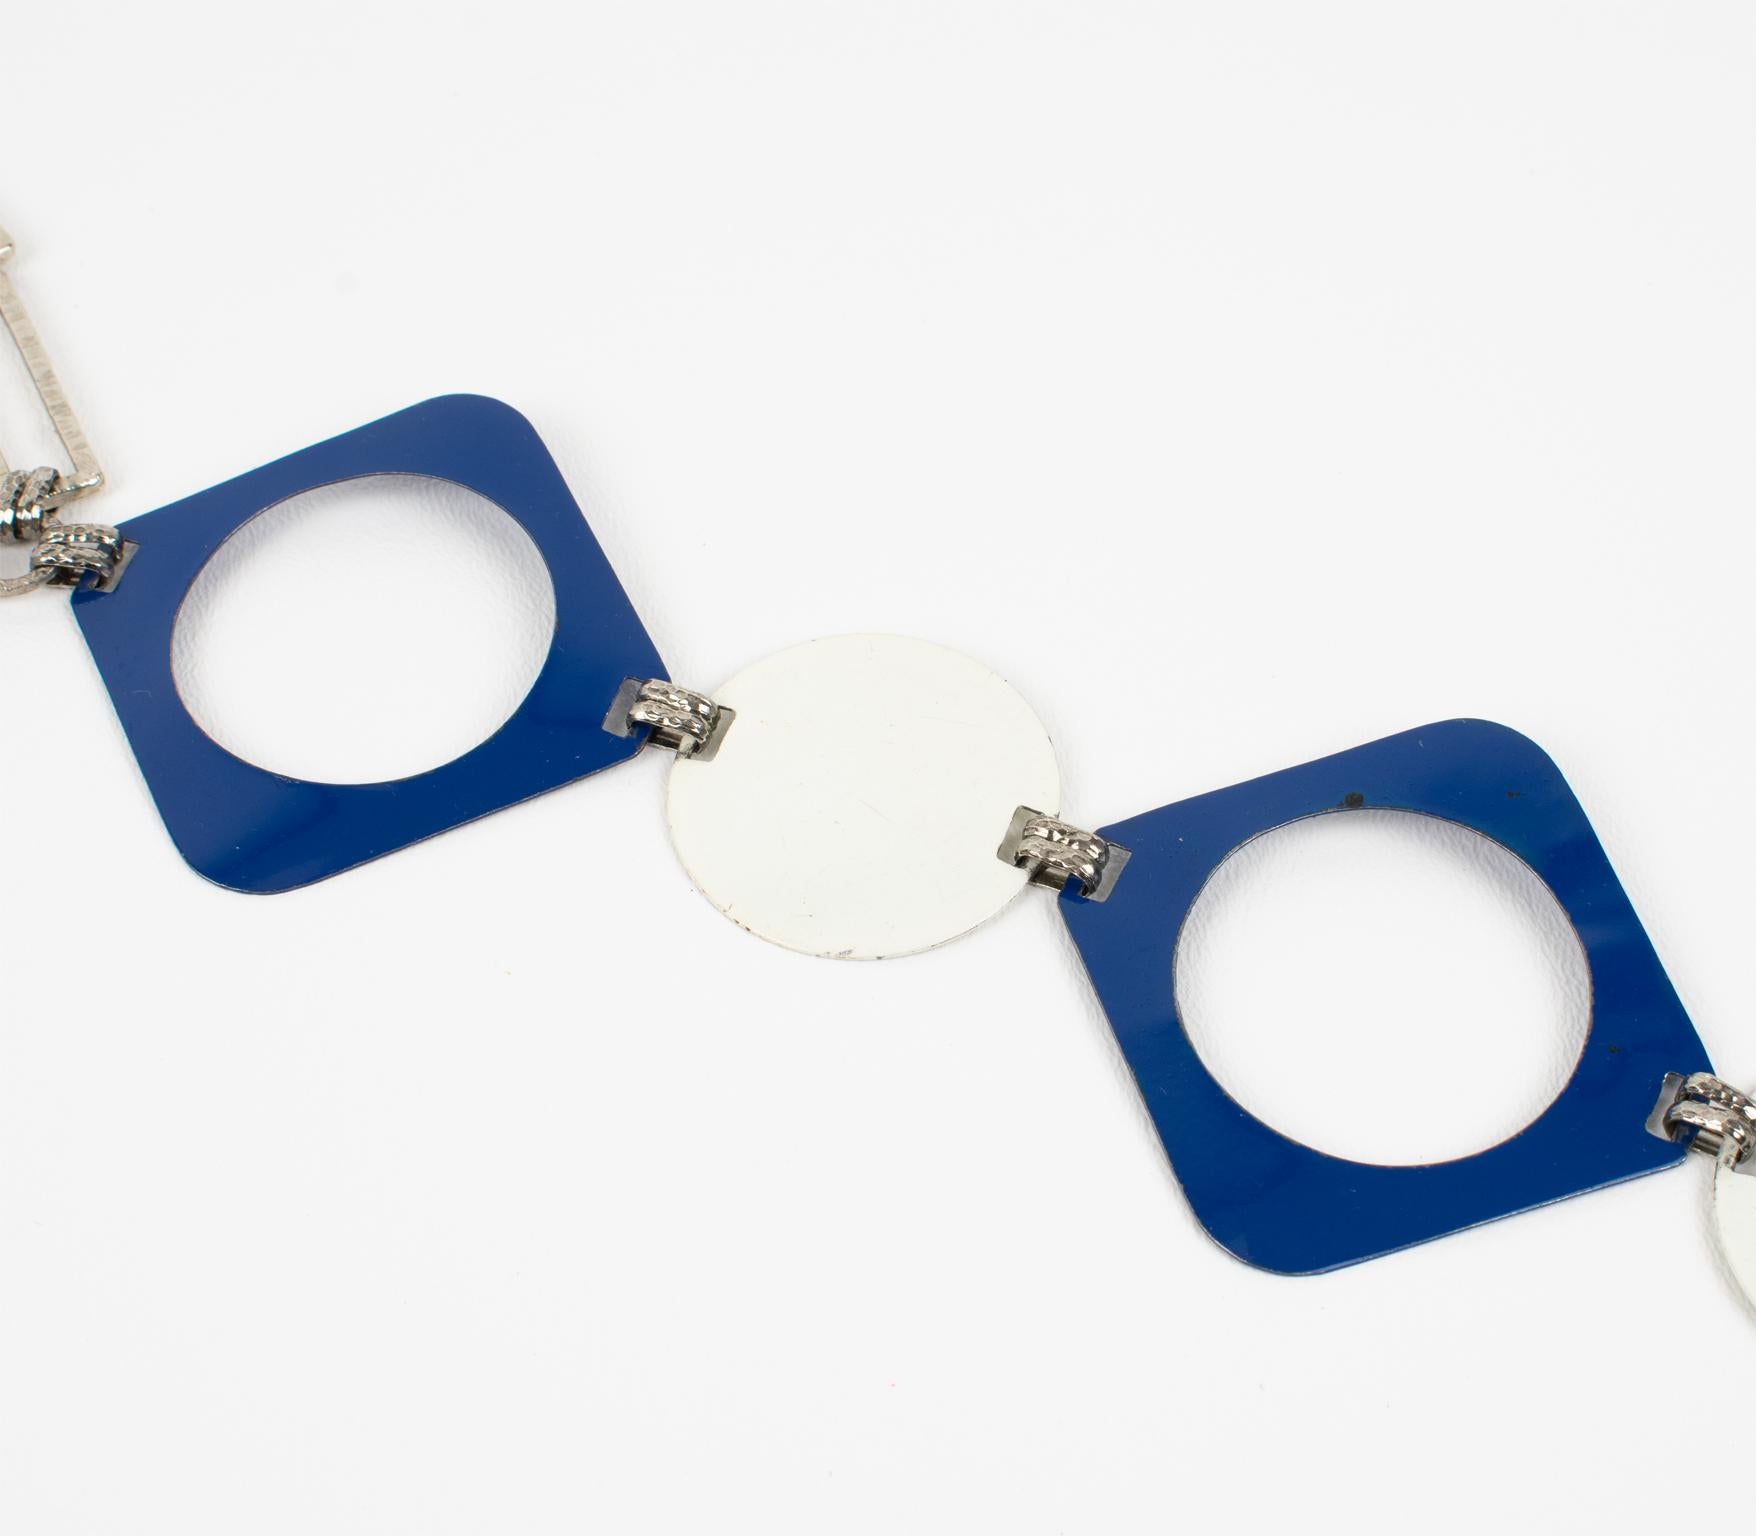 Paco Rabanne Style Space Age Collar Necklace with Blue and White Enamel, 1960s For Sale 3